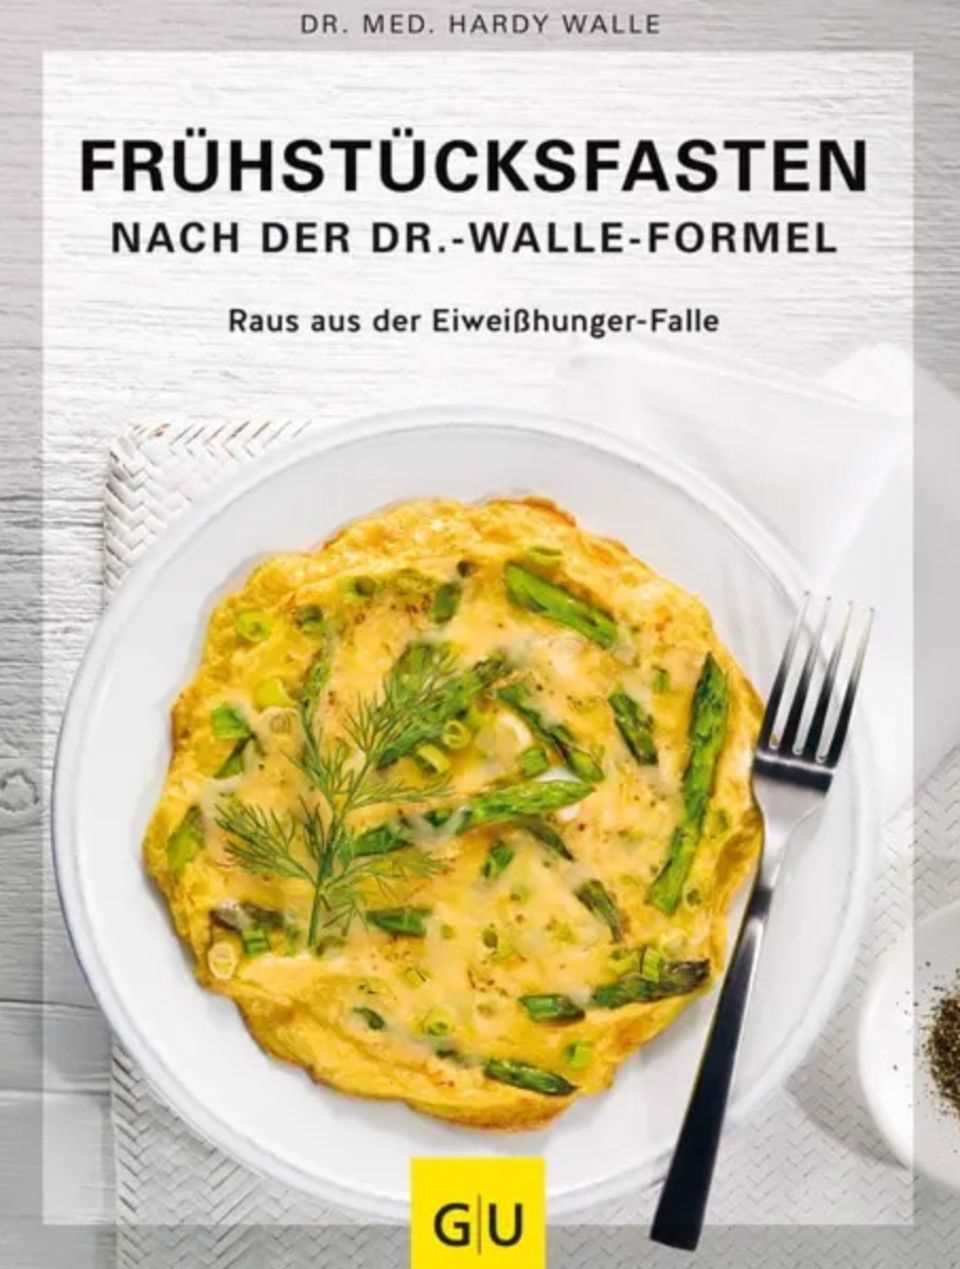 Breakfast fasting: book cover